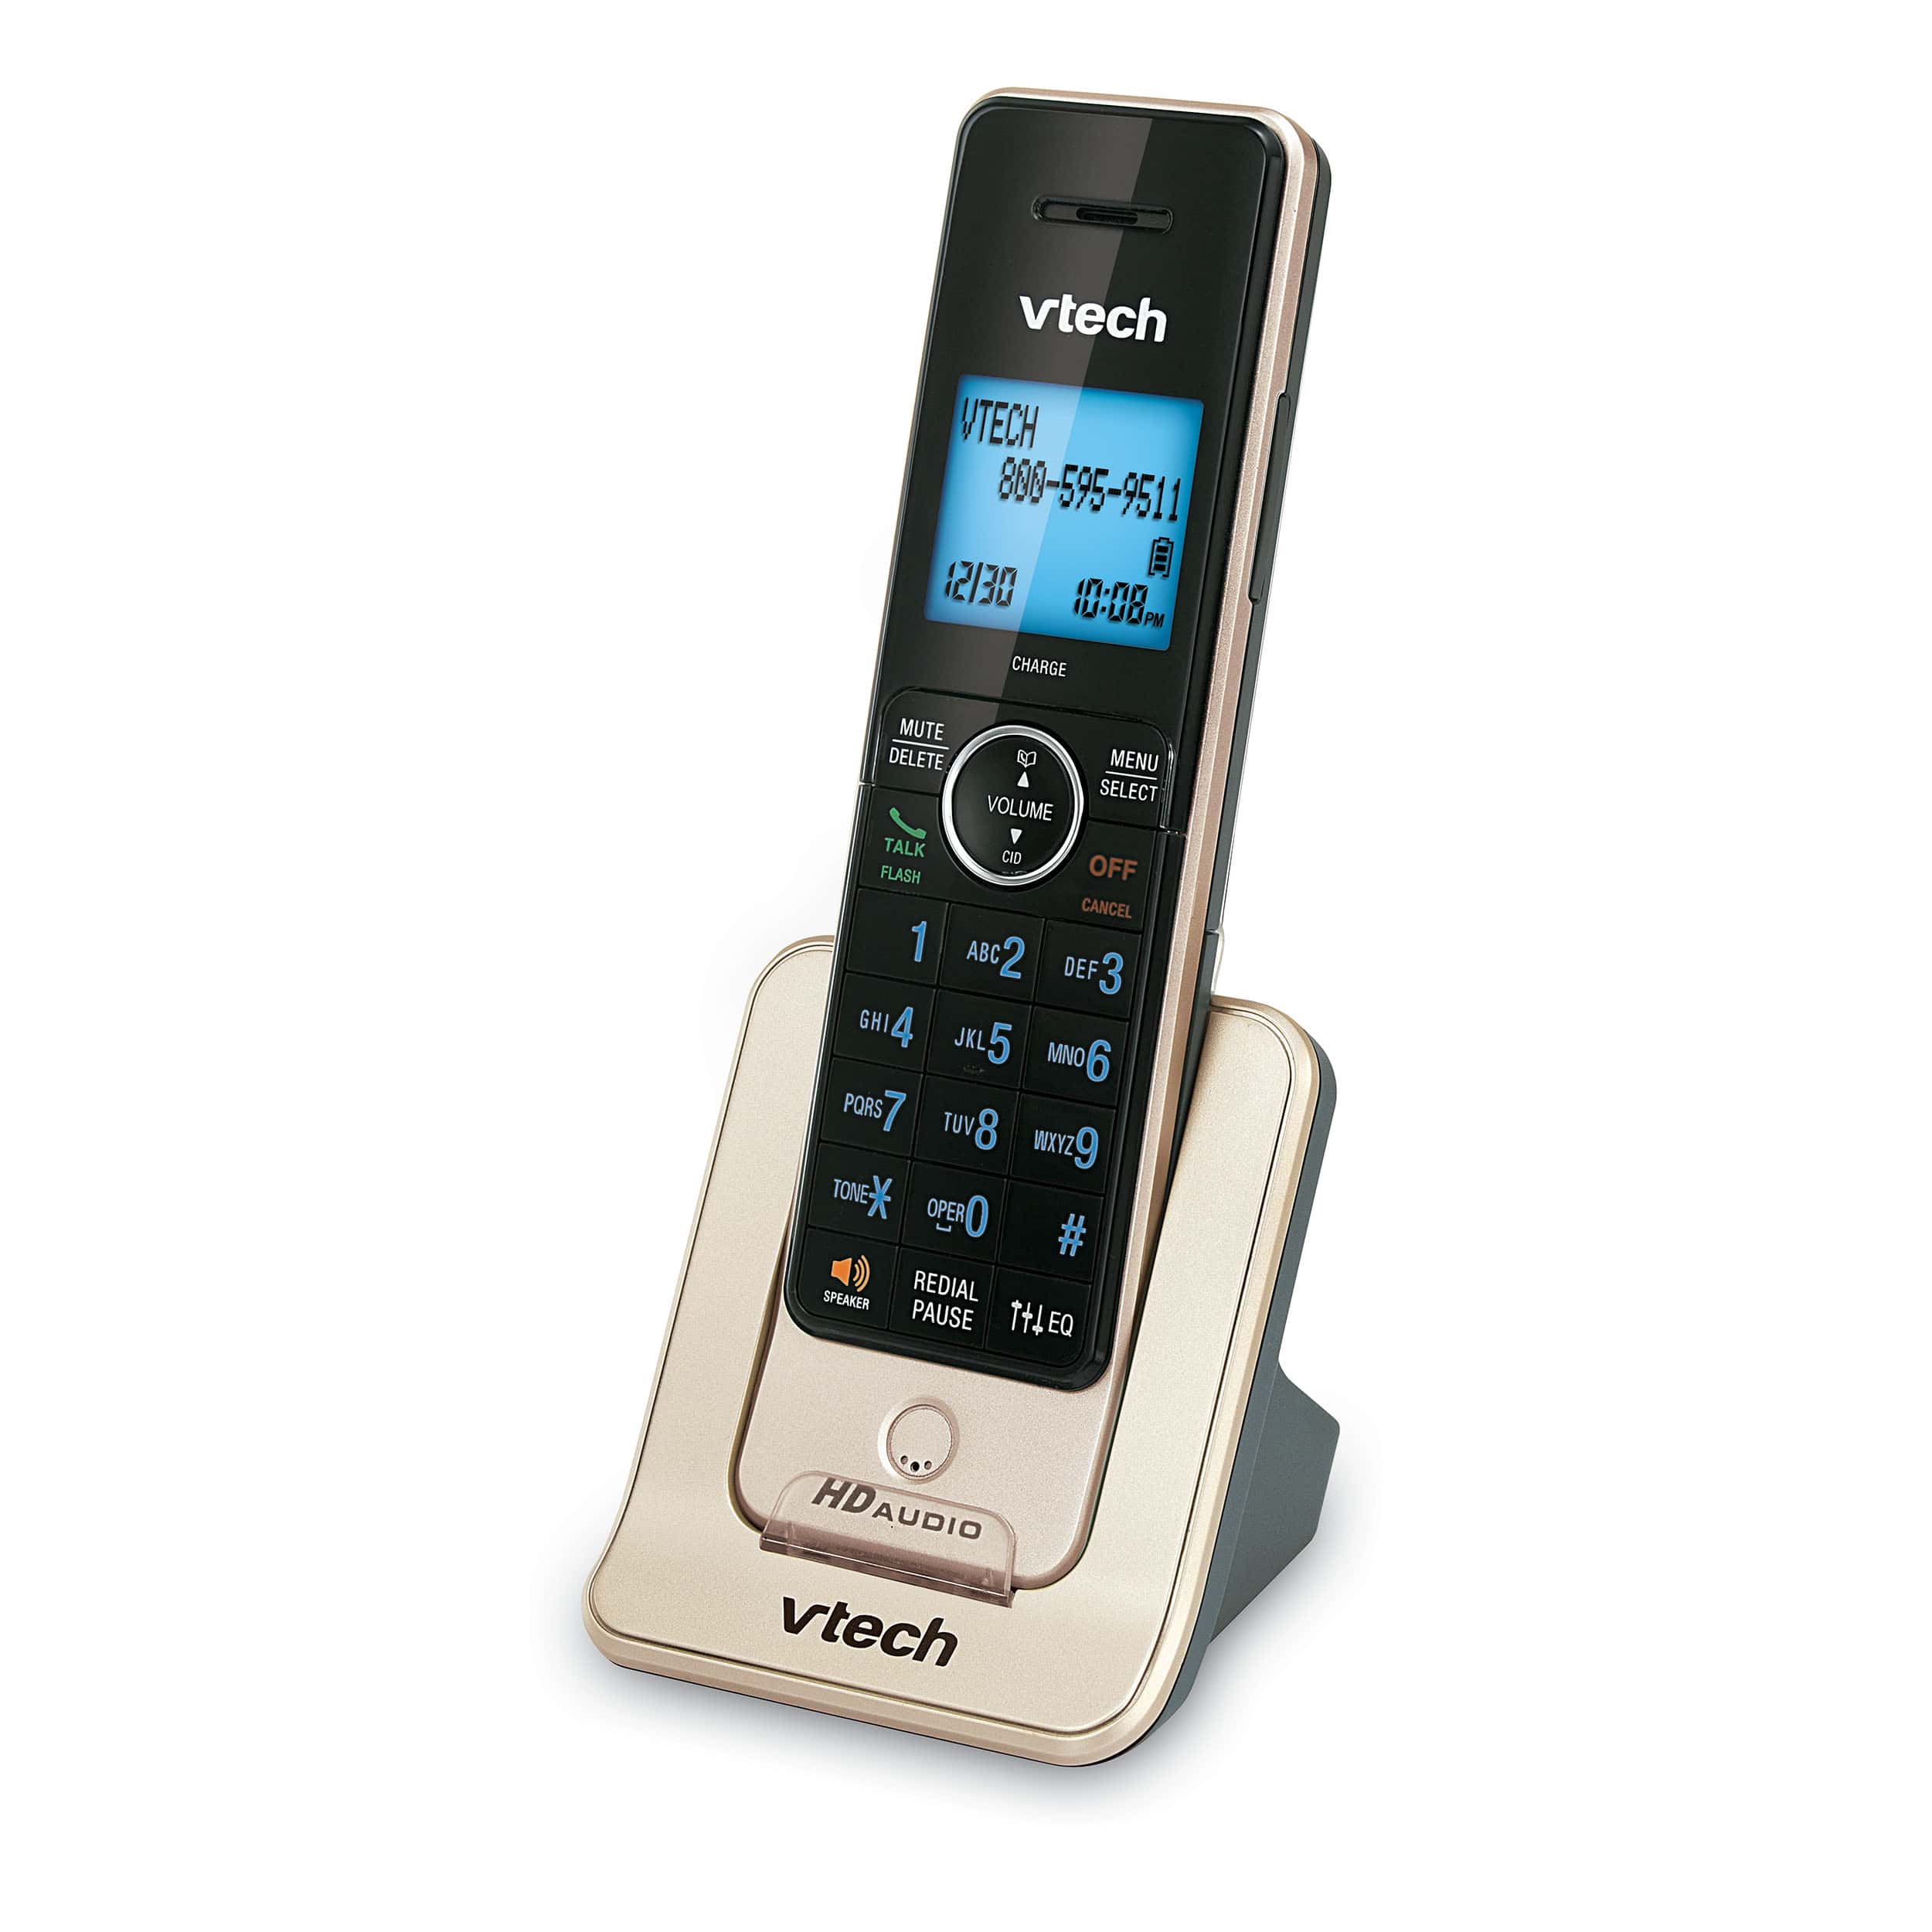 3 Handset Phone System with Caller ID/Call Waiting - view 5